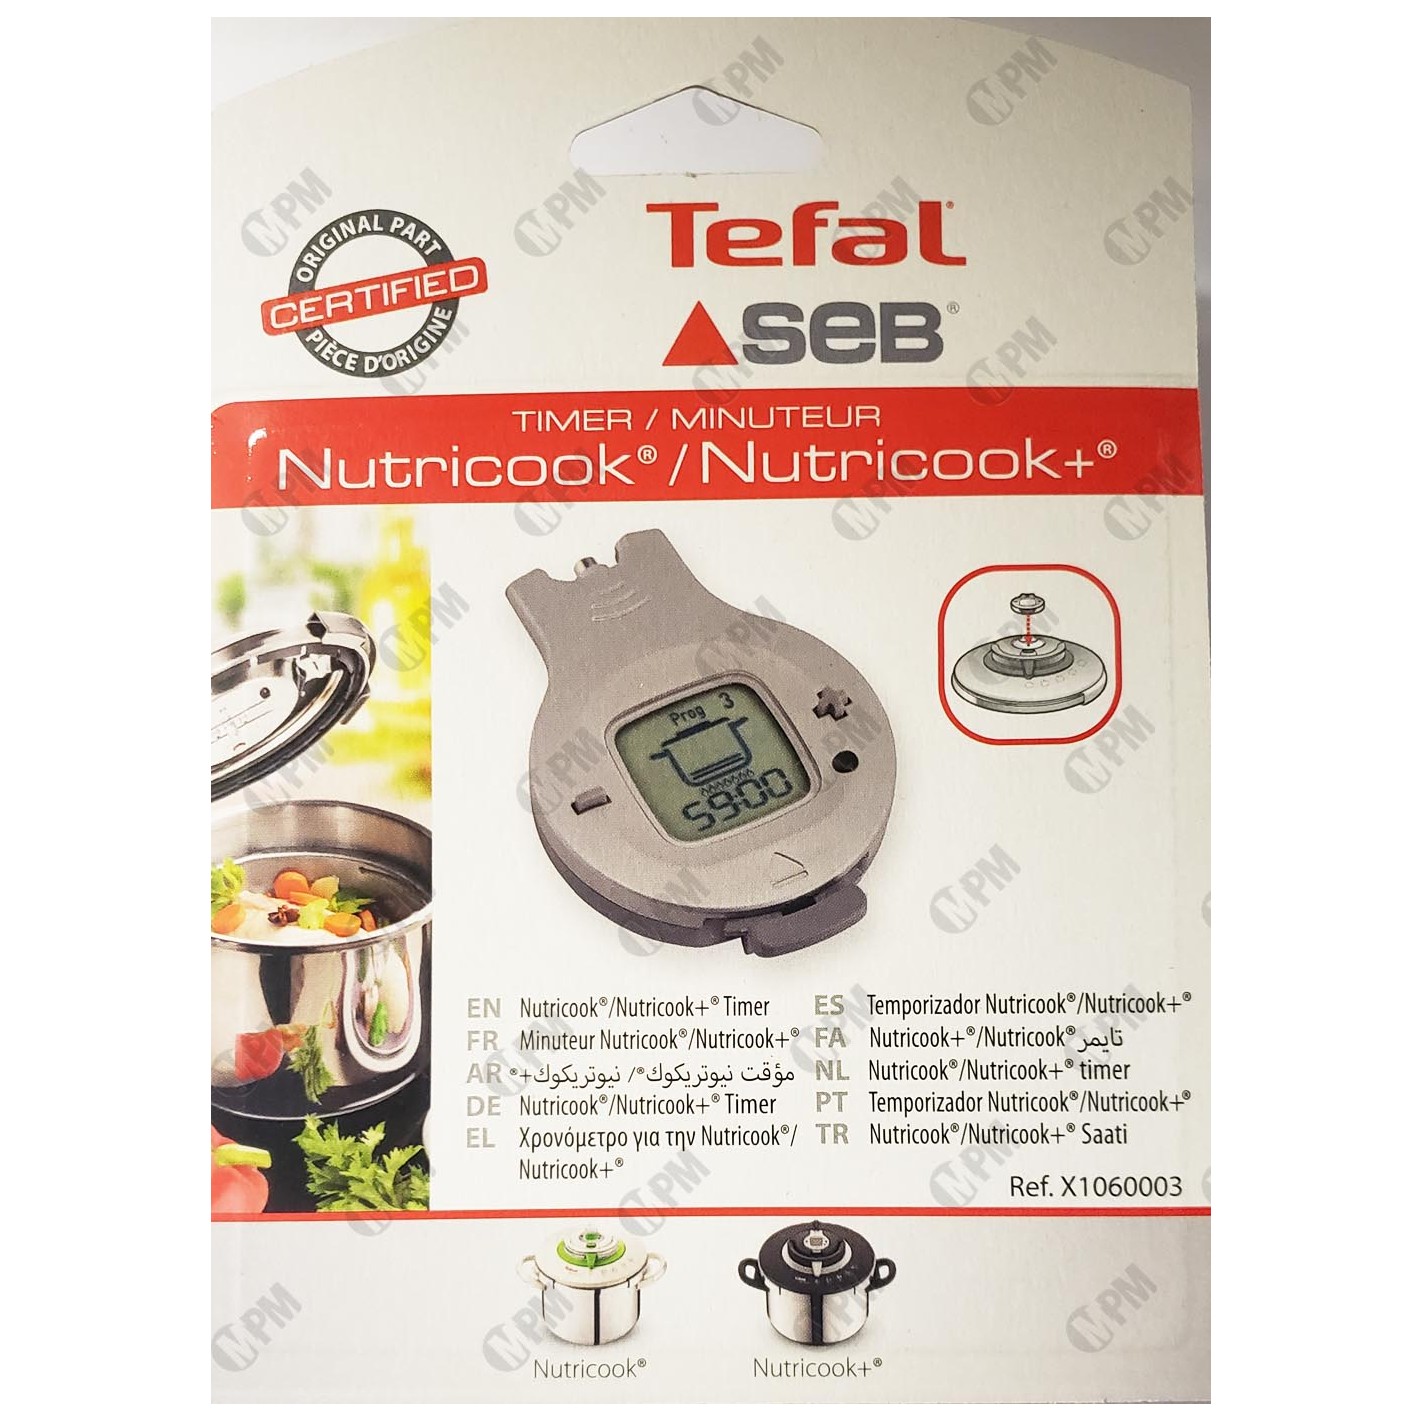 Joint autocuiseur Lagostina Tefal Seb Nutricook Clipso + Acticook